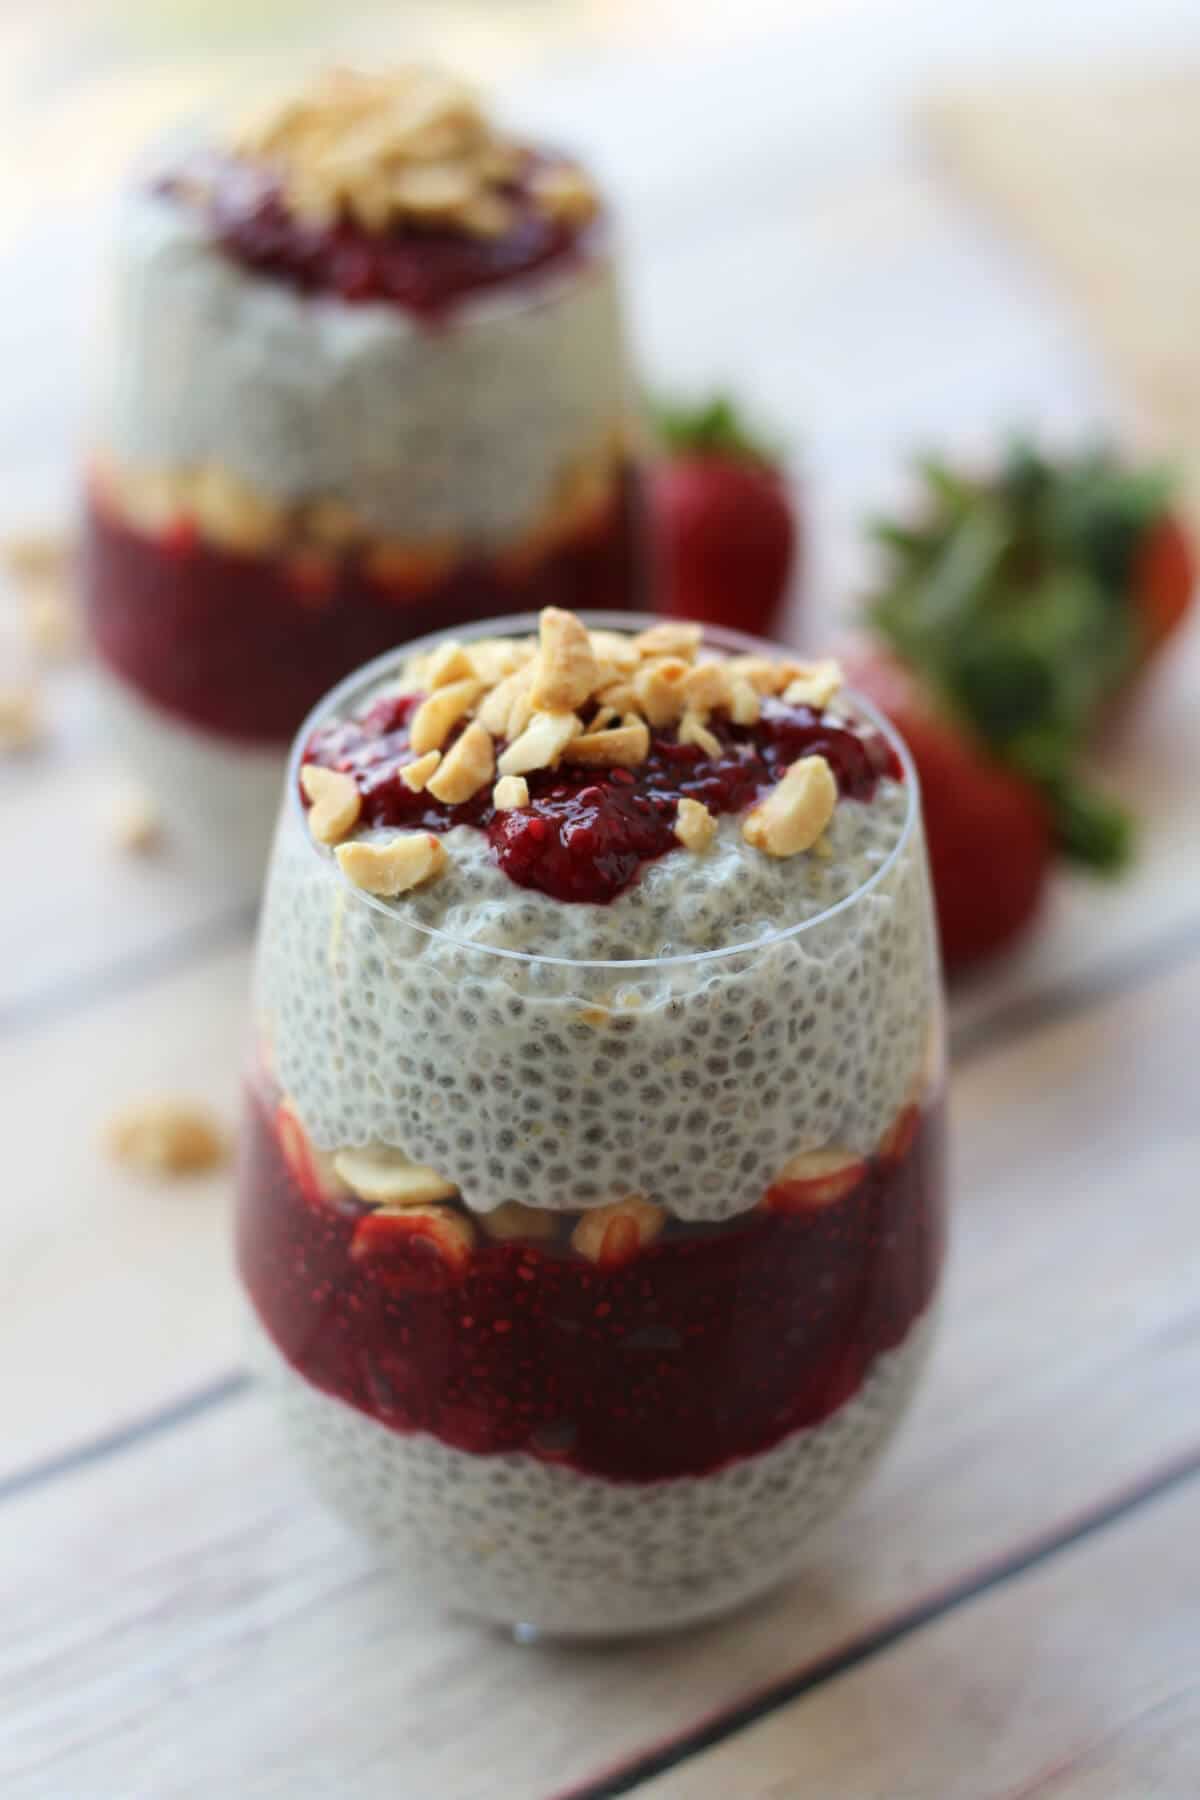 A cup of peanut butter and jam vegan chia pudding.